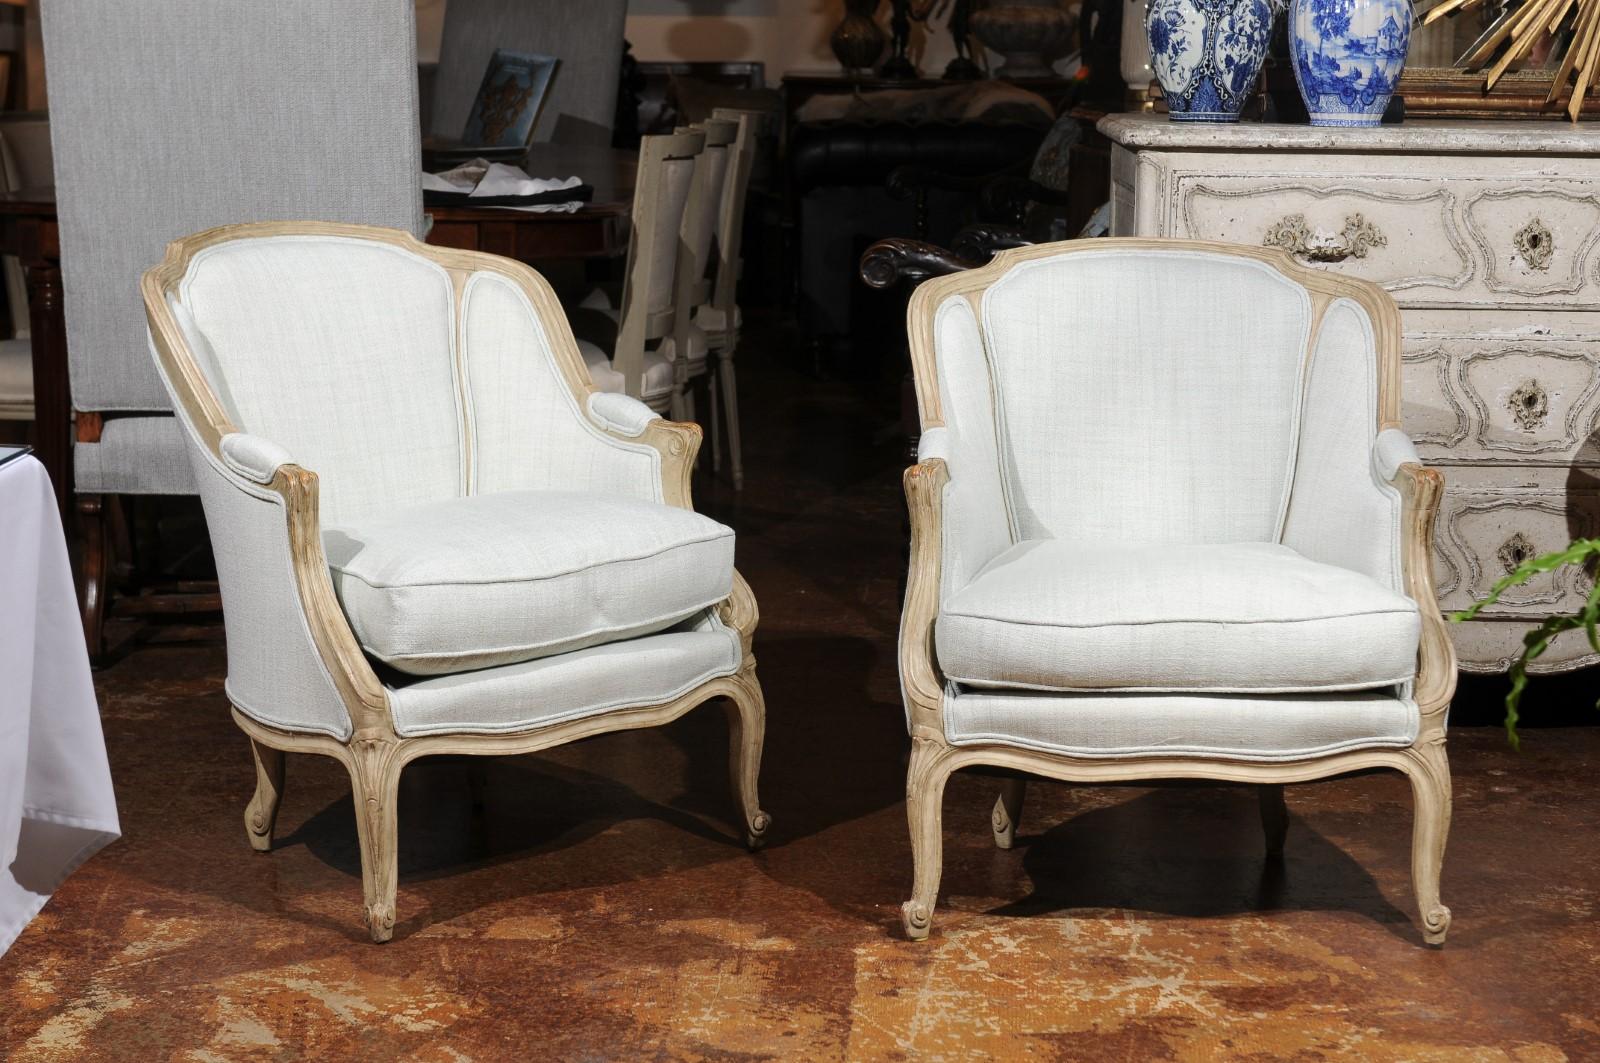 A pair of French Louis XV style painted bergères armchairs from the late 19th century with wraparound backs, cabriole legs and new upholstery. Born in the later years of the 19th century, each of this pair of French bergères features an enveloping